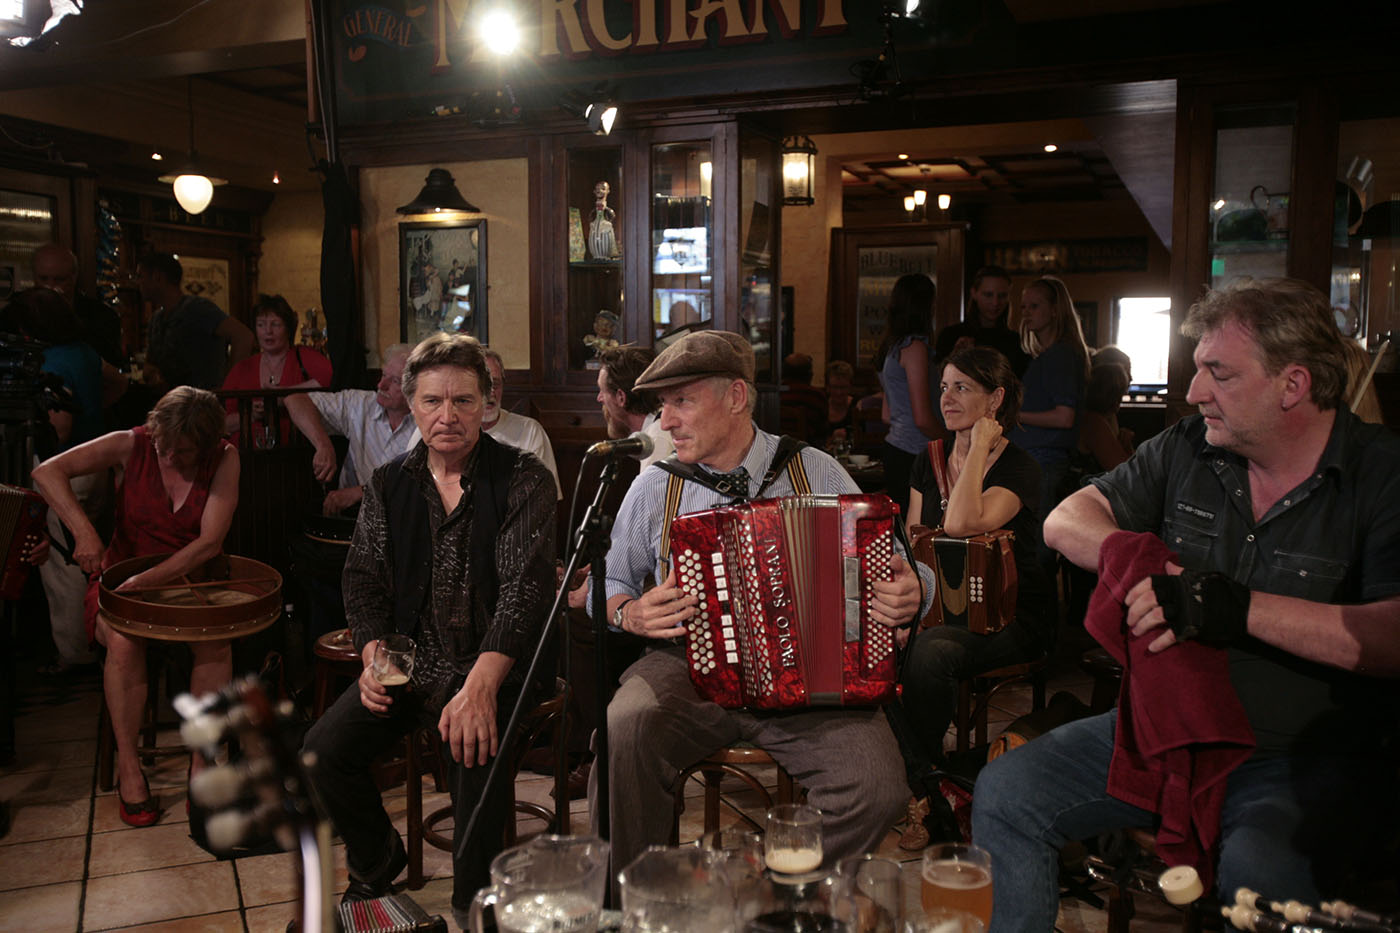 Musicians, Irish dancers and film crew on set in a pub. - click to view larger image